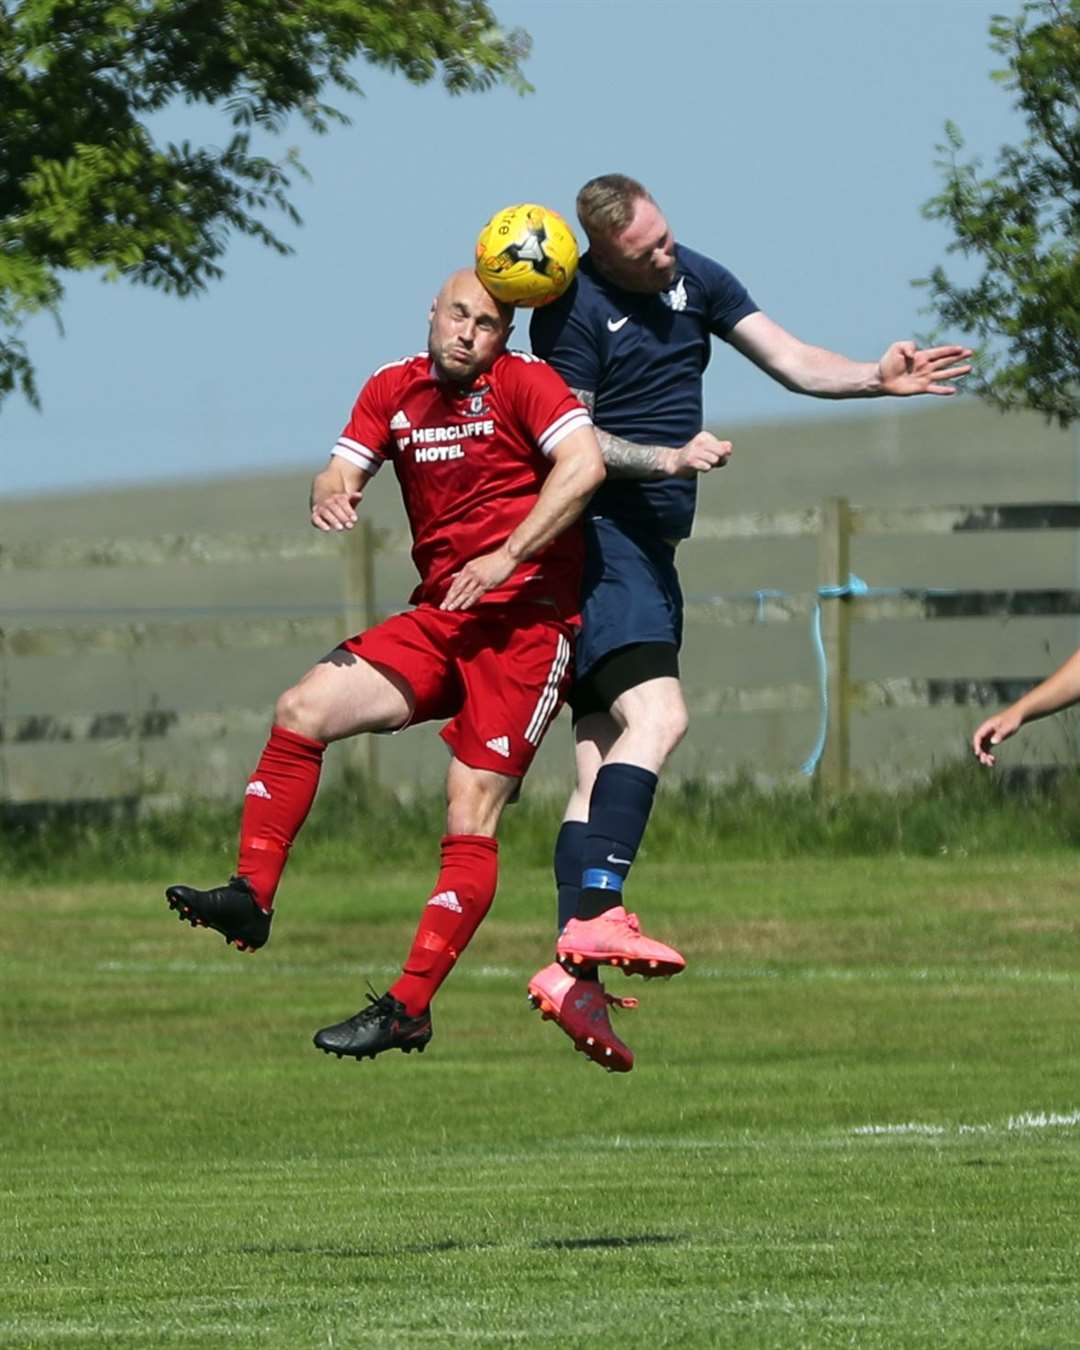 Wick Groats striker Sandy Sutherland in an aerial duel with Aidan Reid of High Ormlie Hotspur in the Eain Mackintosh Cup final. Picture: James Gunn